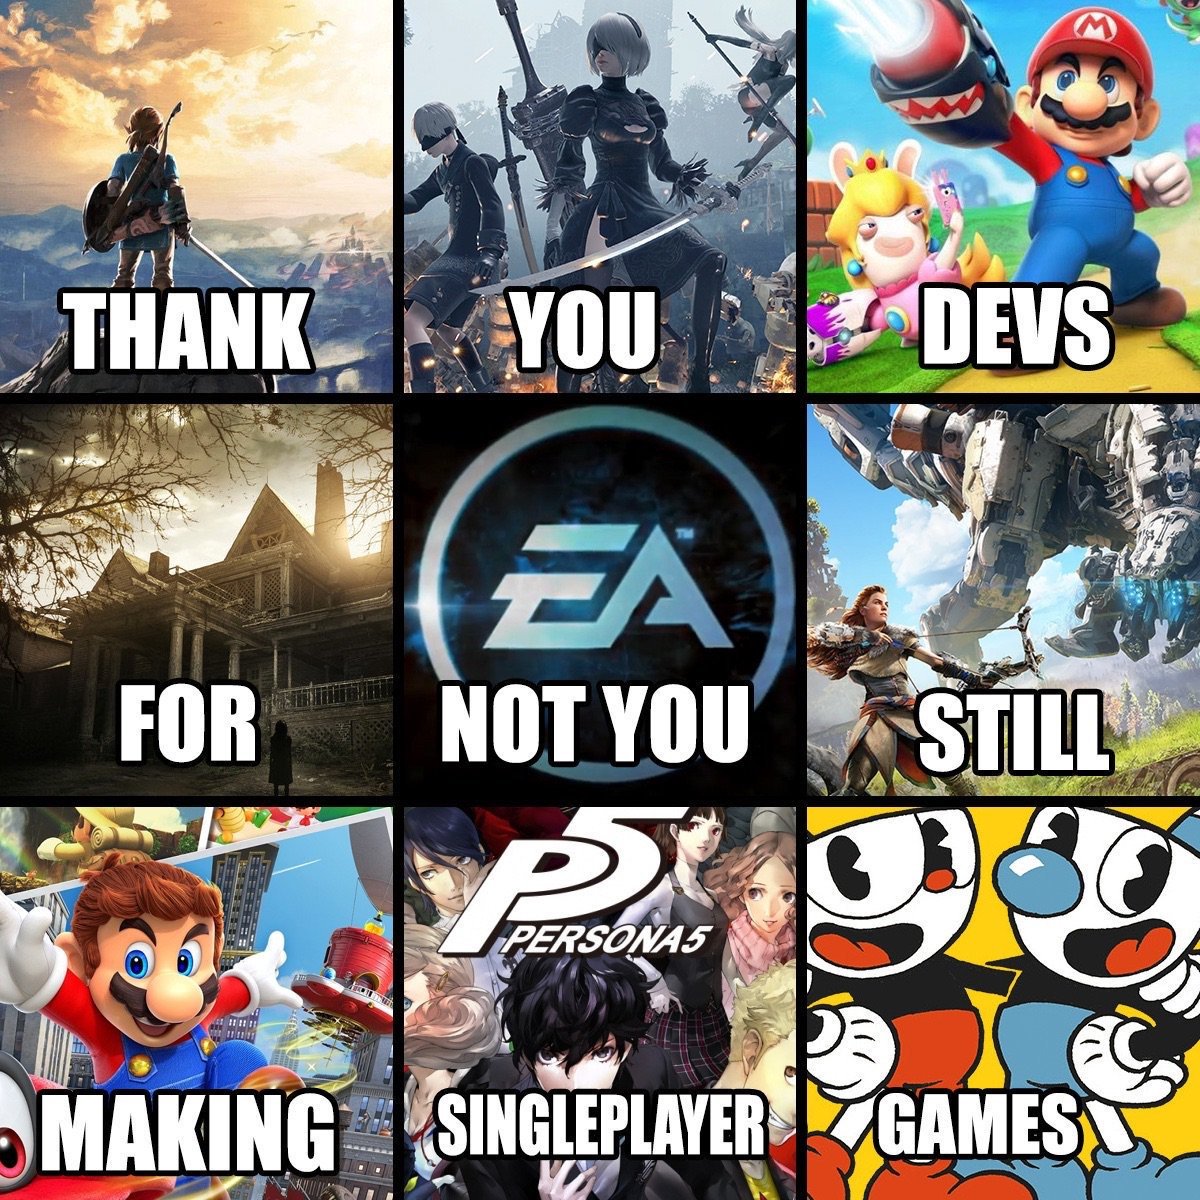 single player games meme - Thank You Devs For Not You Still Ipos Personas 11 Making Singleplayer Games.